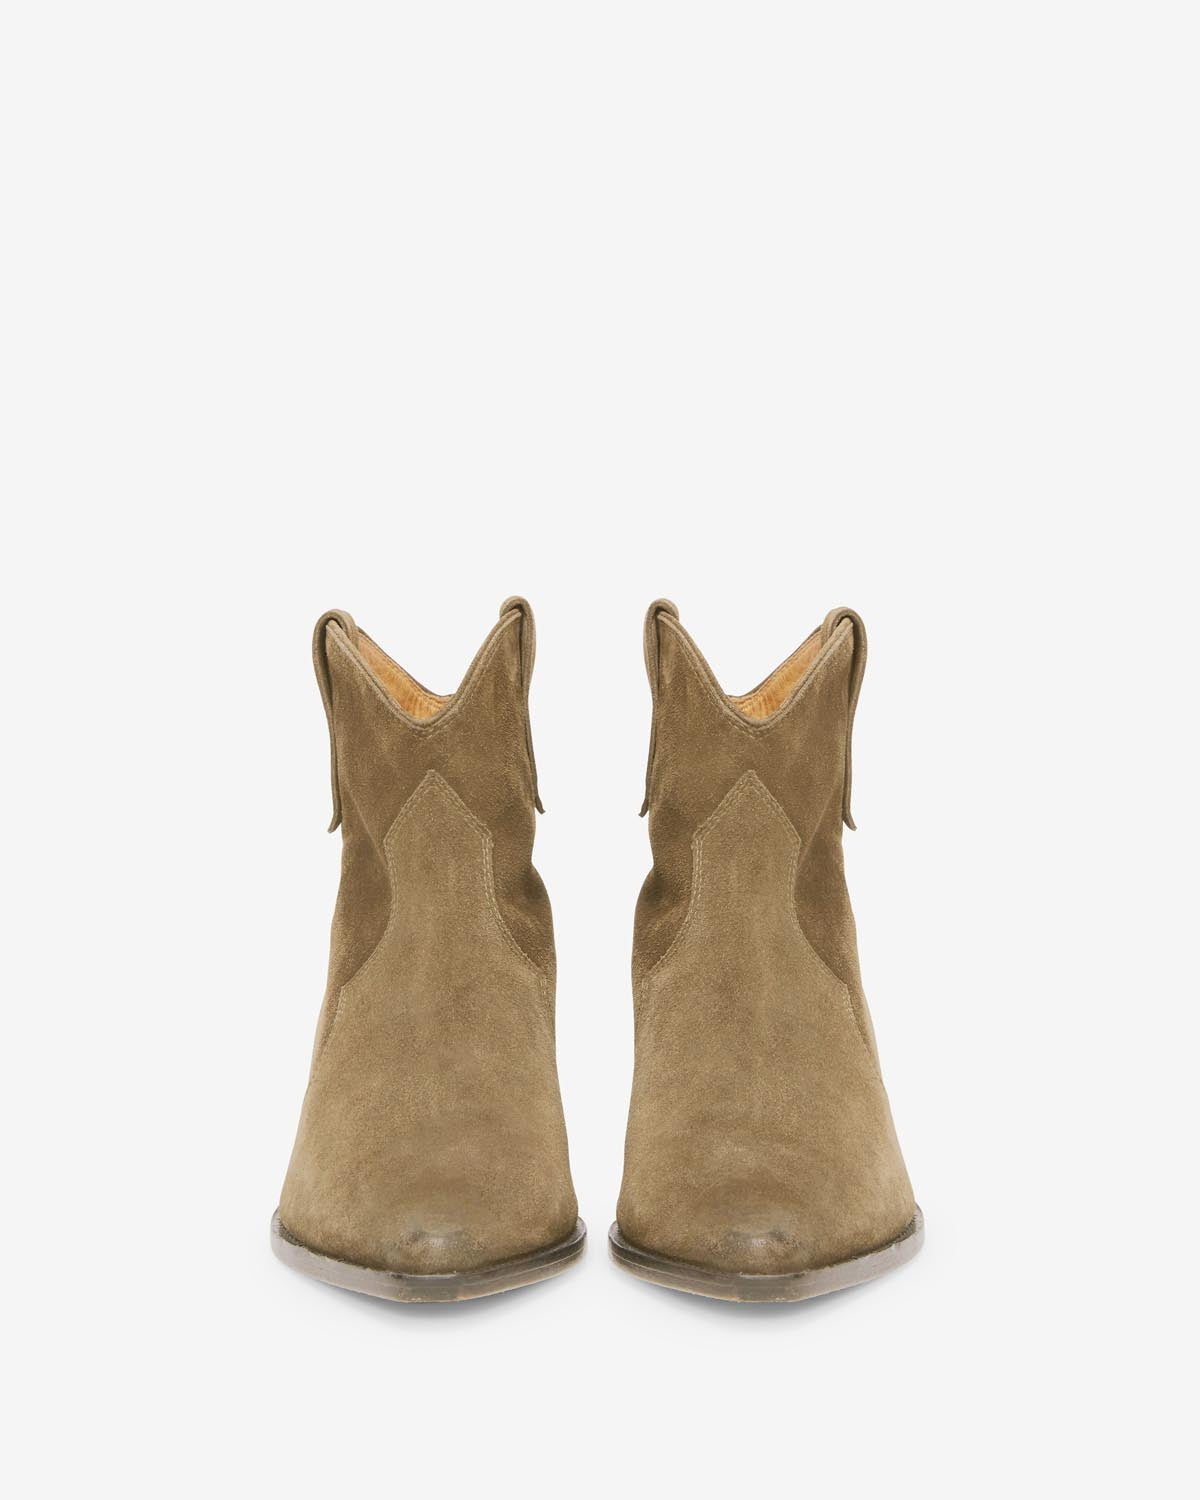 Dewina cowboy boots Woman Taupe 1